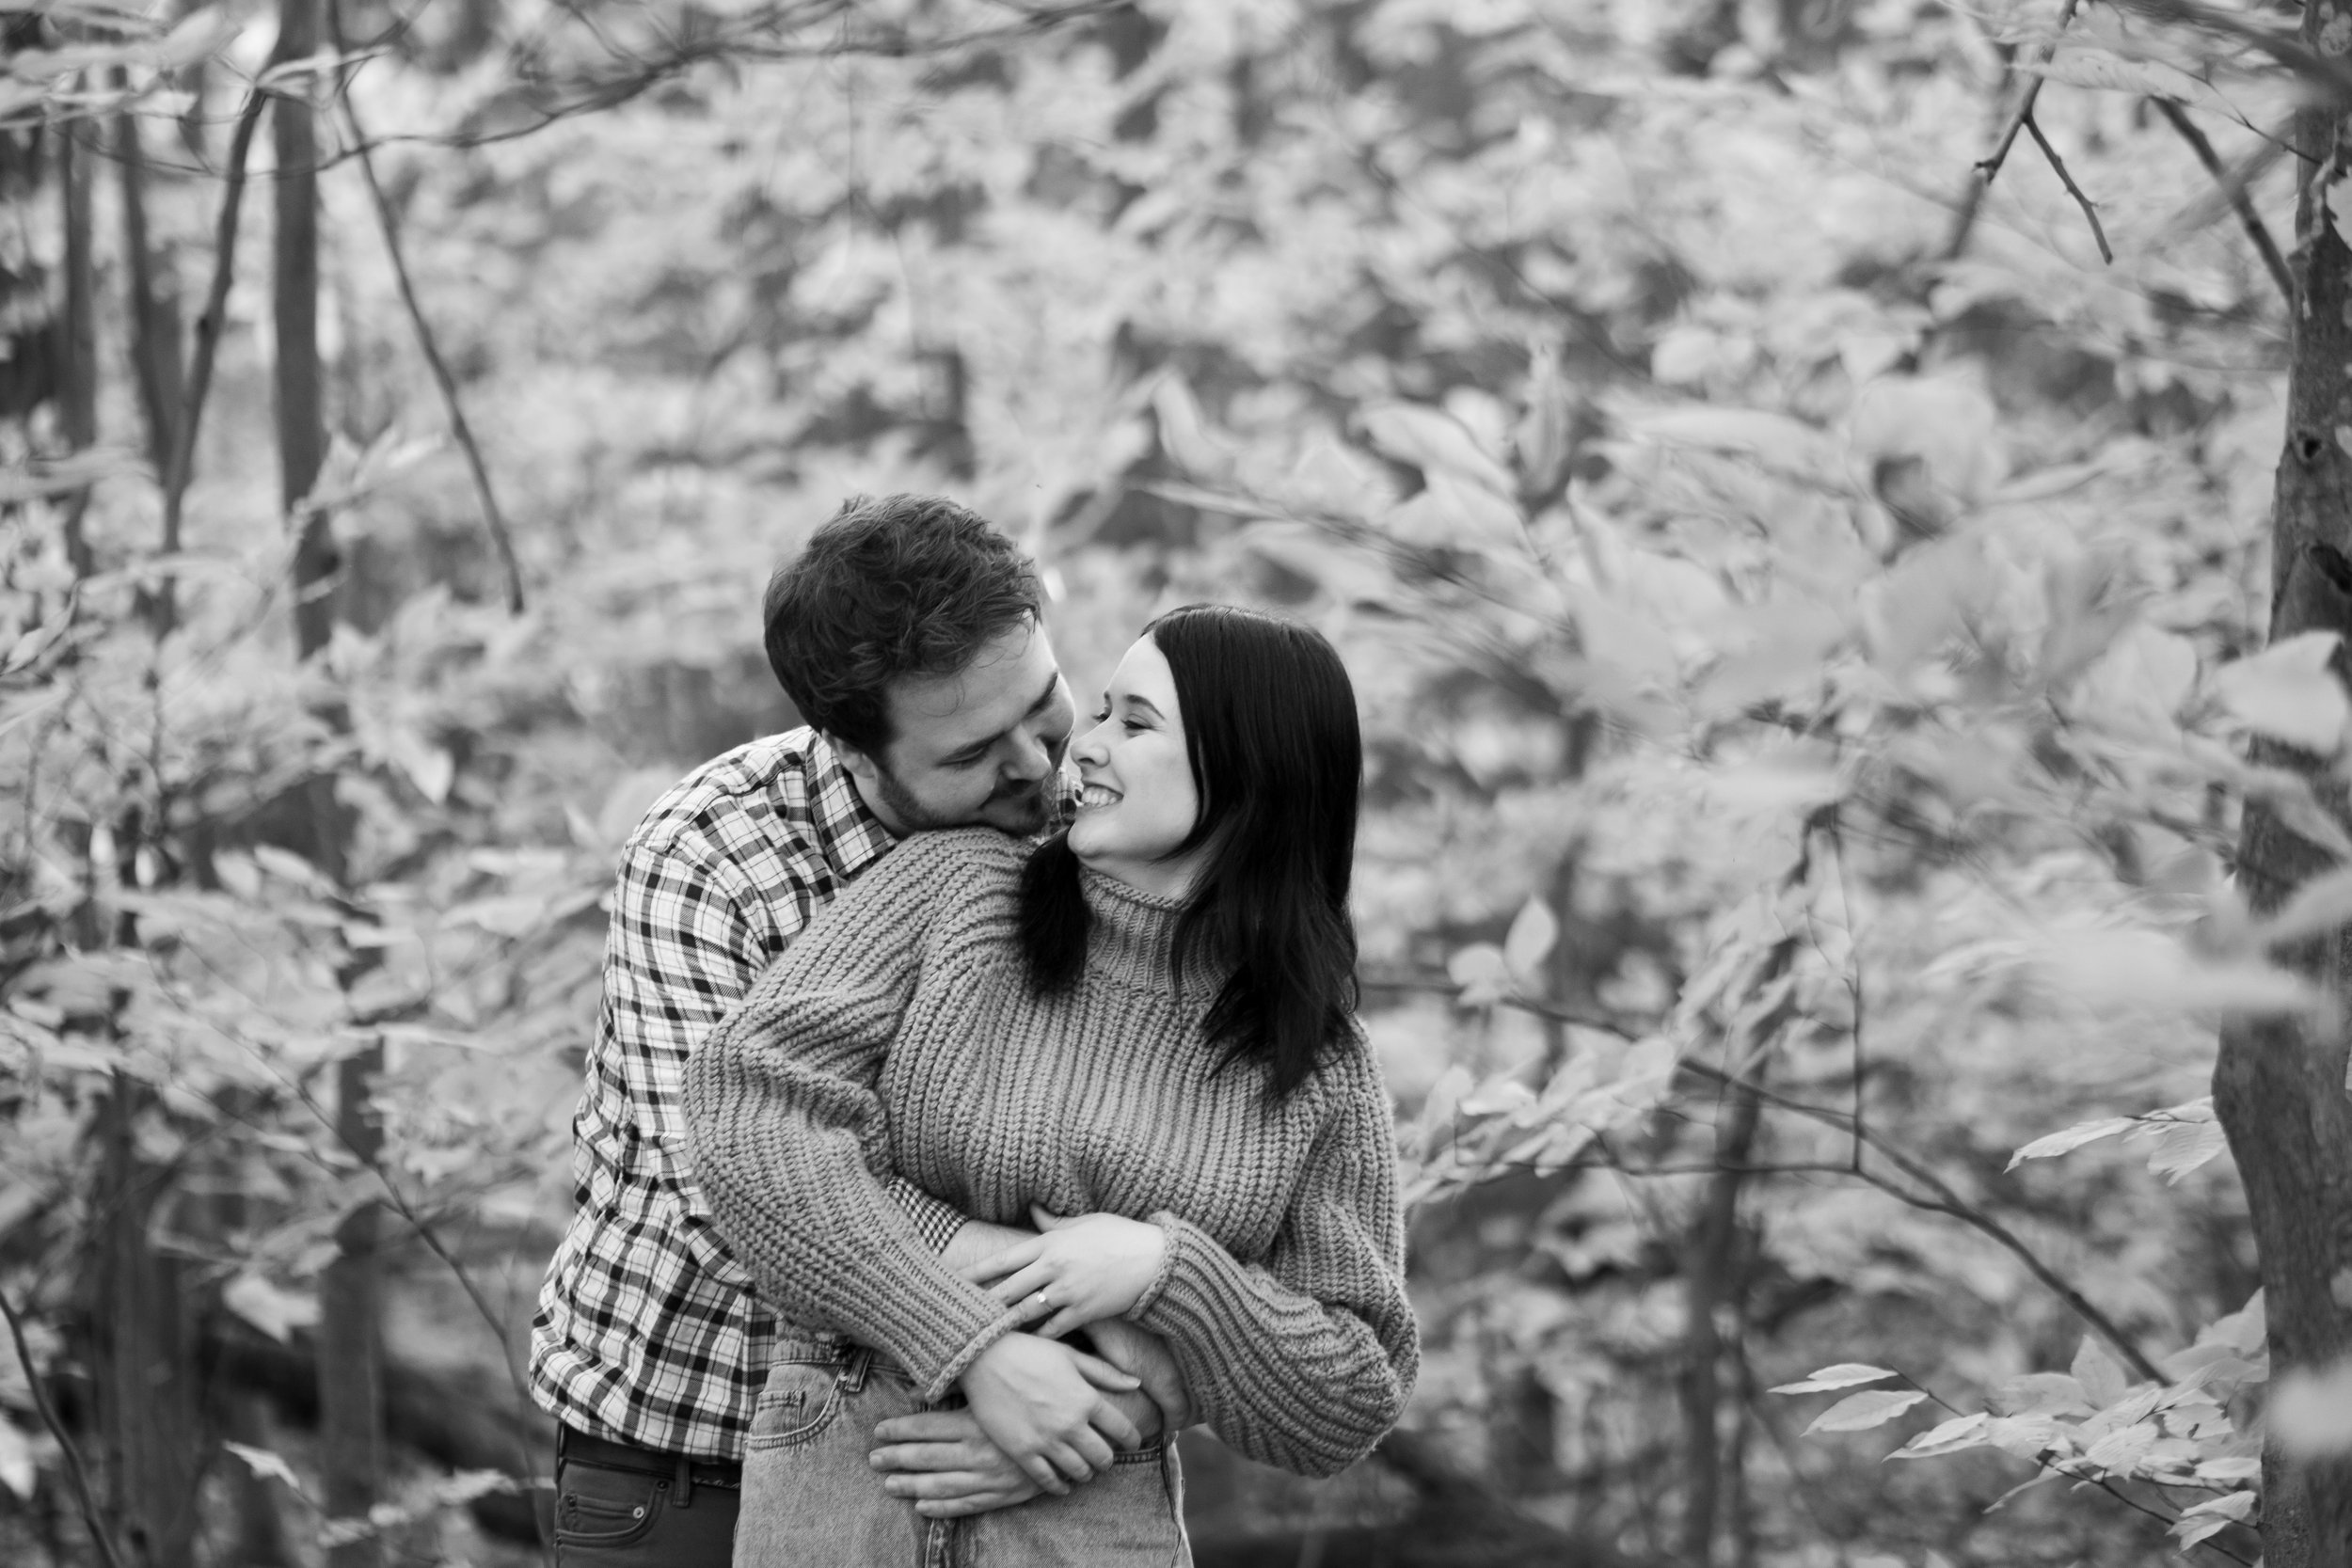  A black and white engagement photograph from Megan and Joshua’s engagement session at a nature trail in Cambridge, Ontario by Toronto wedding photographer Scott Williams. 